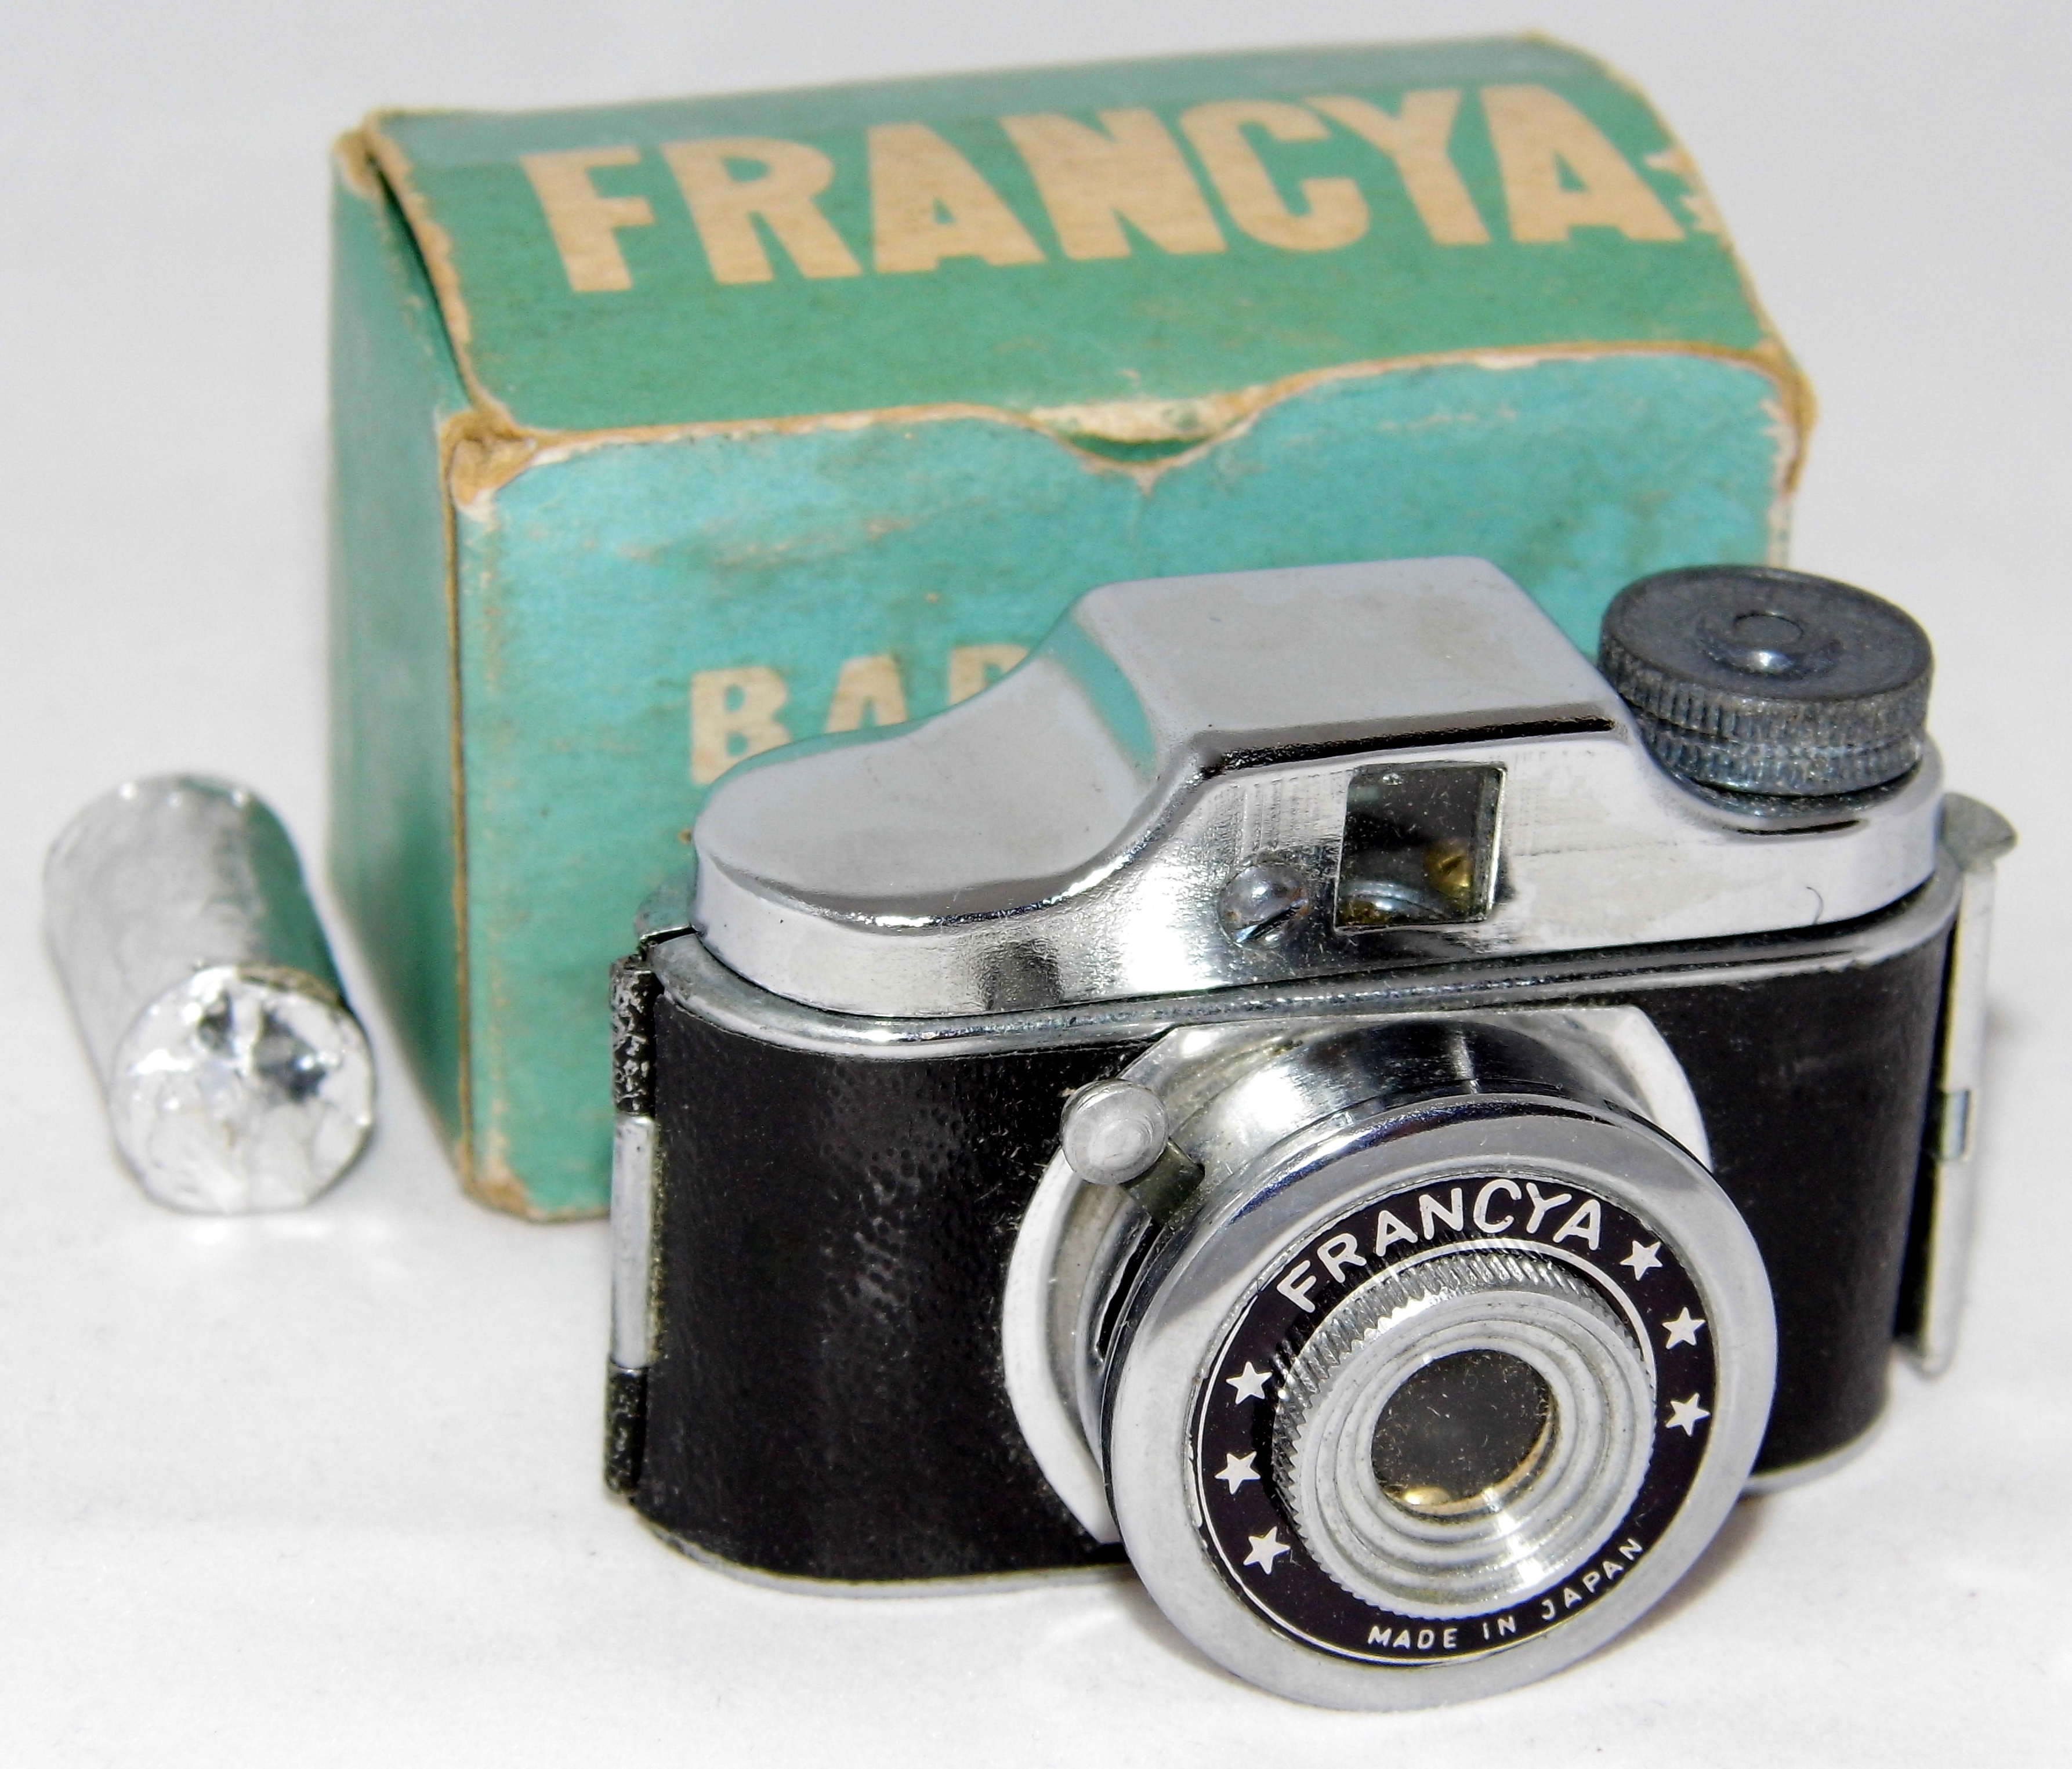 Vintage Francya Baby Miniature Film Camera With Box And Roll Of Film, Made In Japan (16425458151)